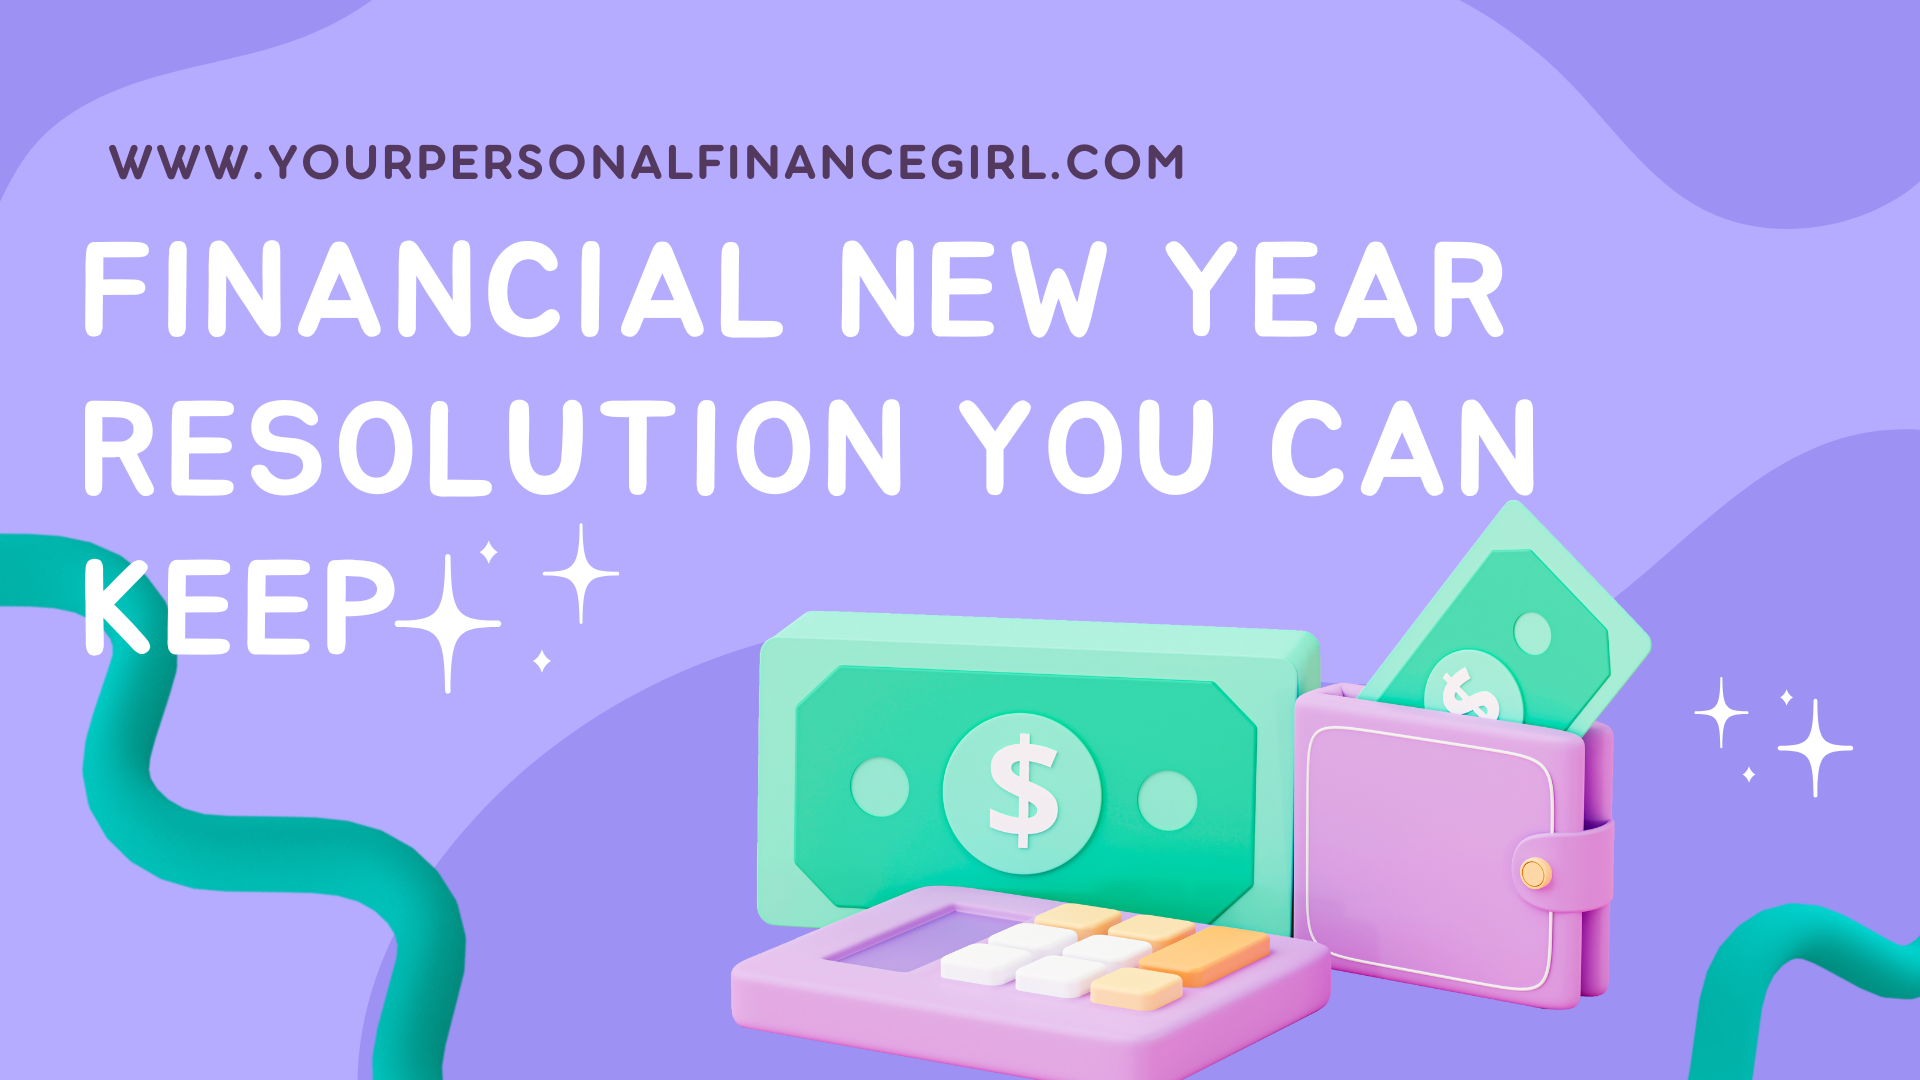 Financial new year resolution you can keep